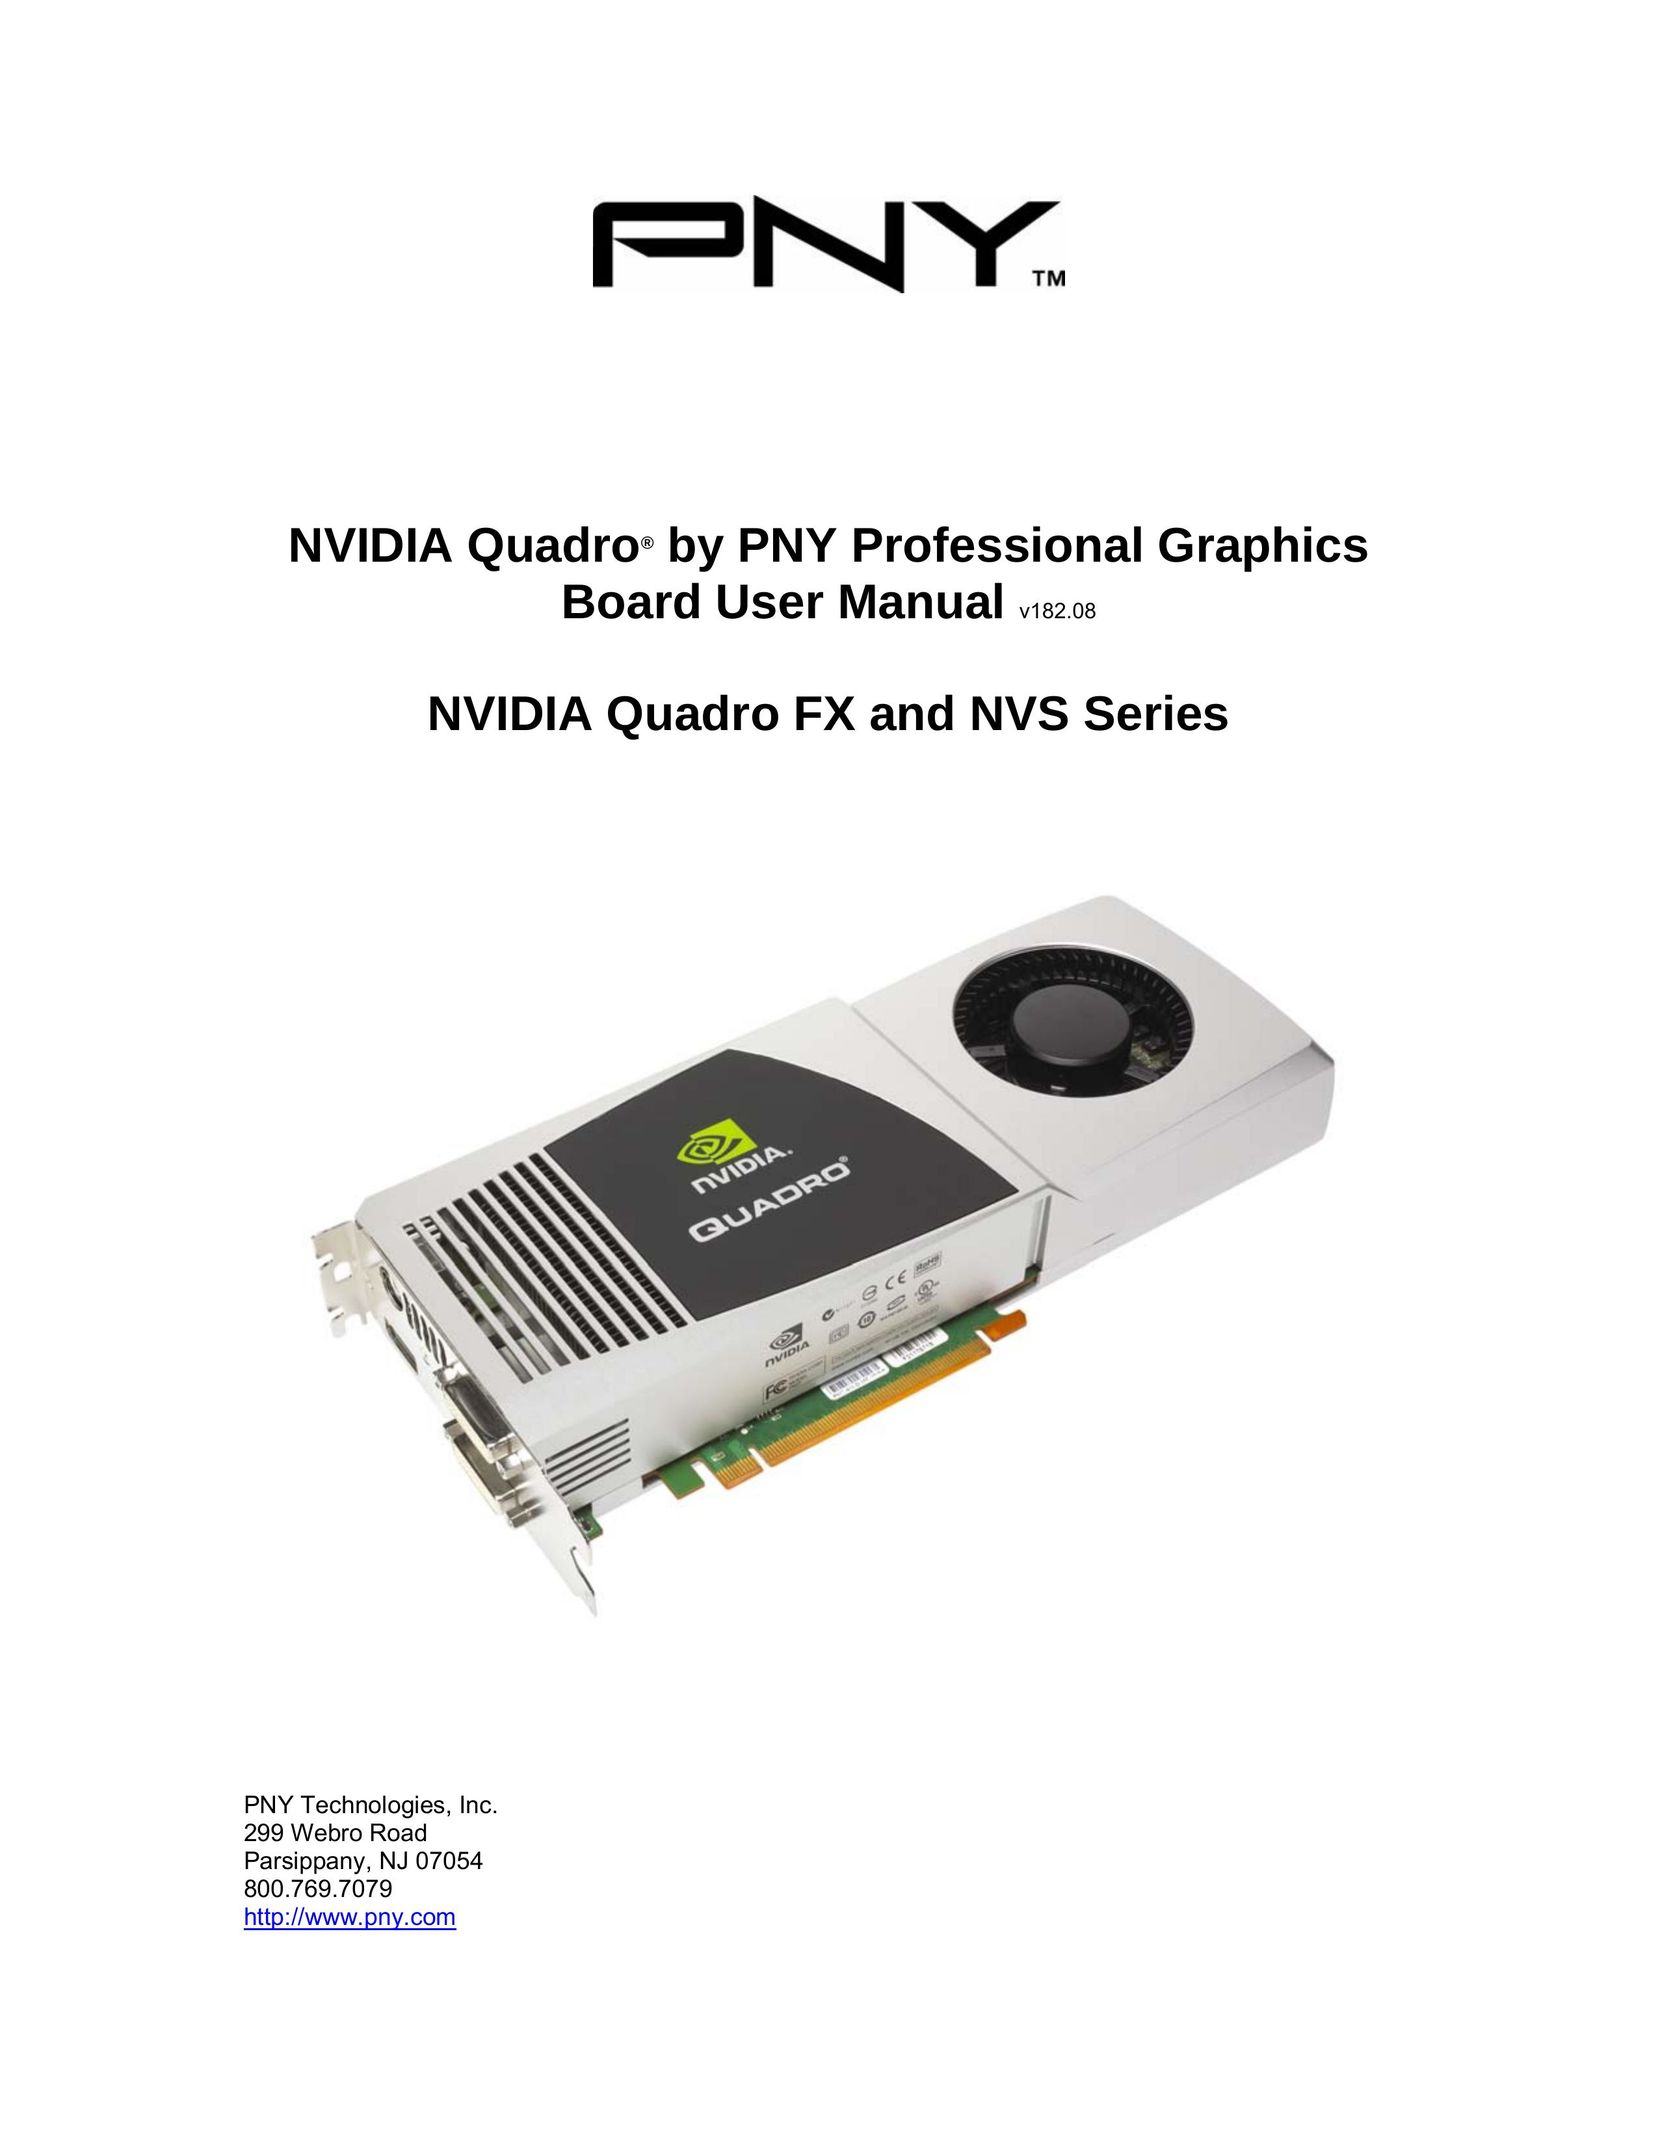 PNY FX 3800 Computer Hardware User Manual